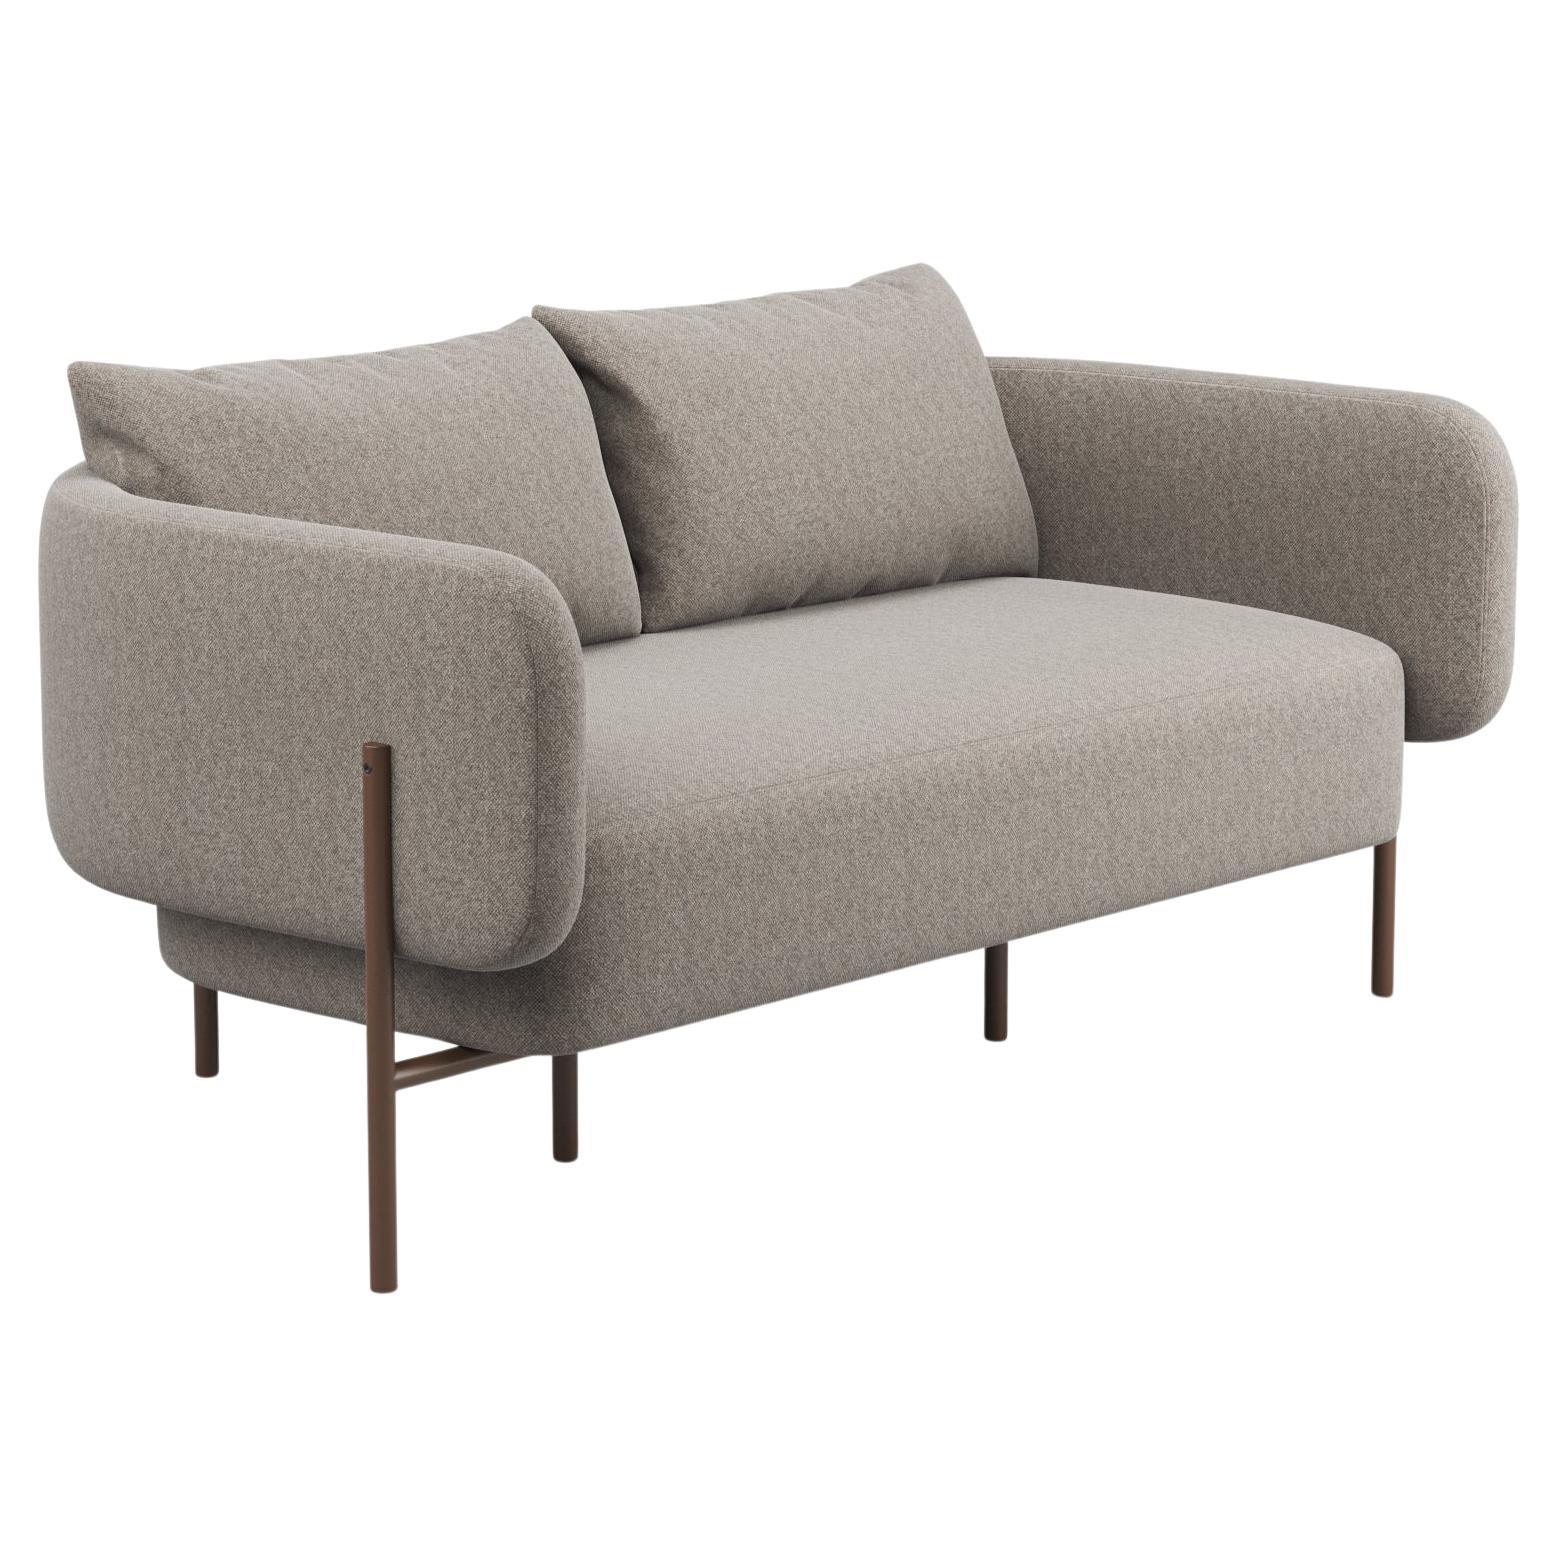 Hayche Abrazo 2 Seater Sofa - Brown, UK, Made to Order For Sale